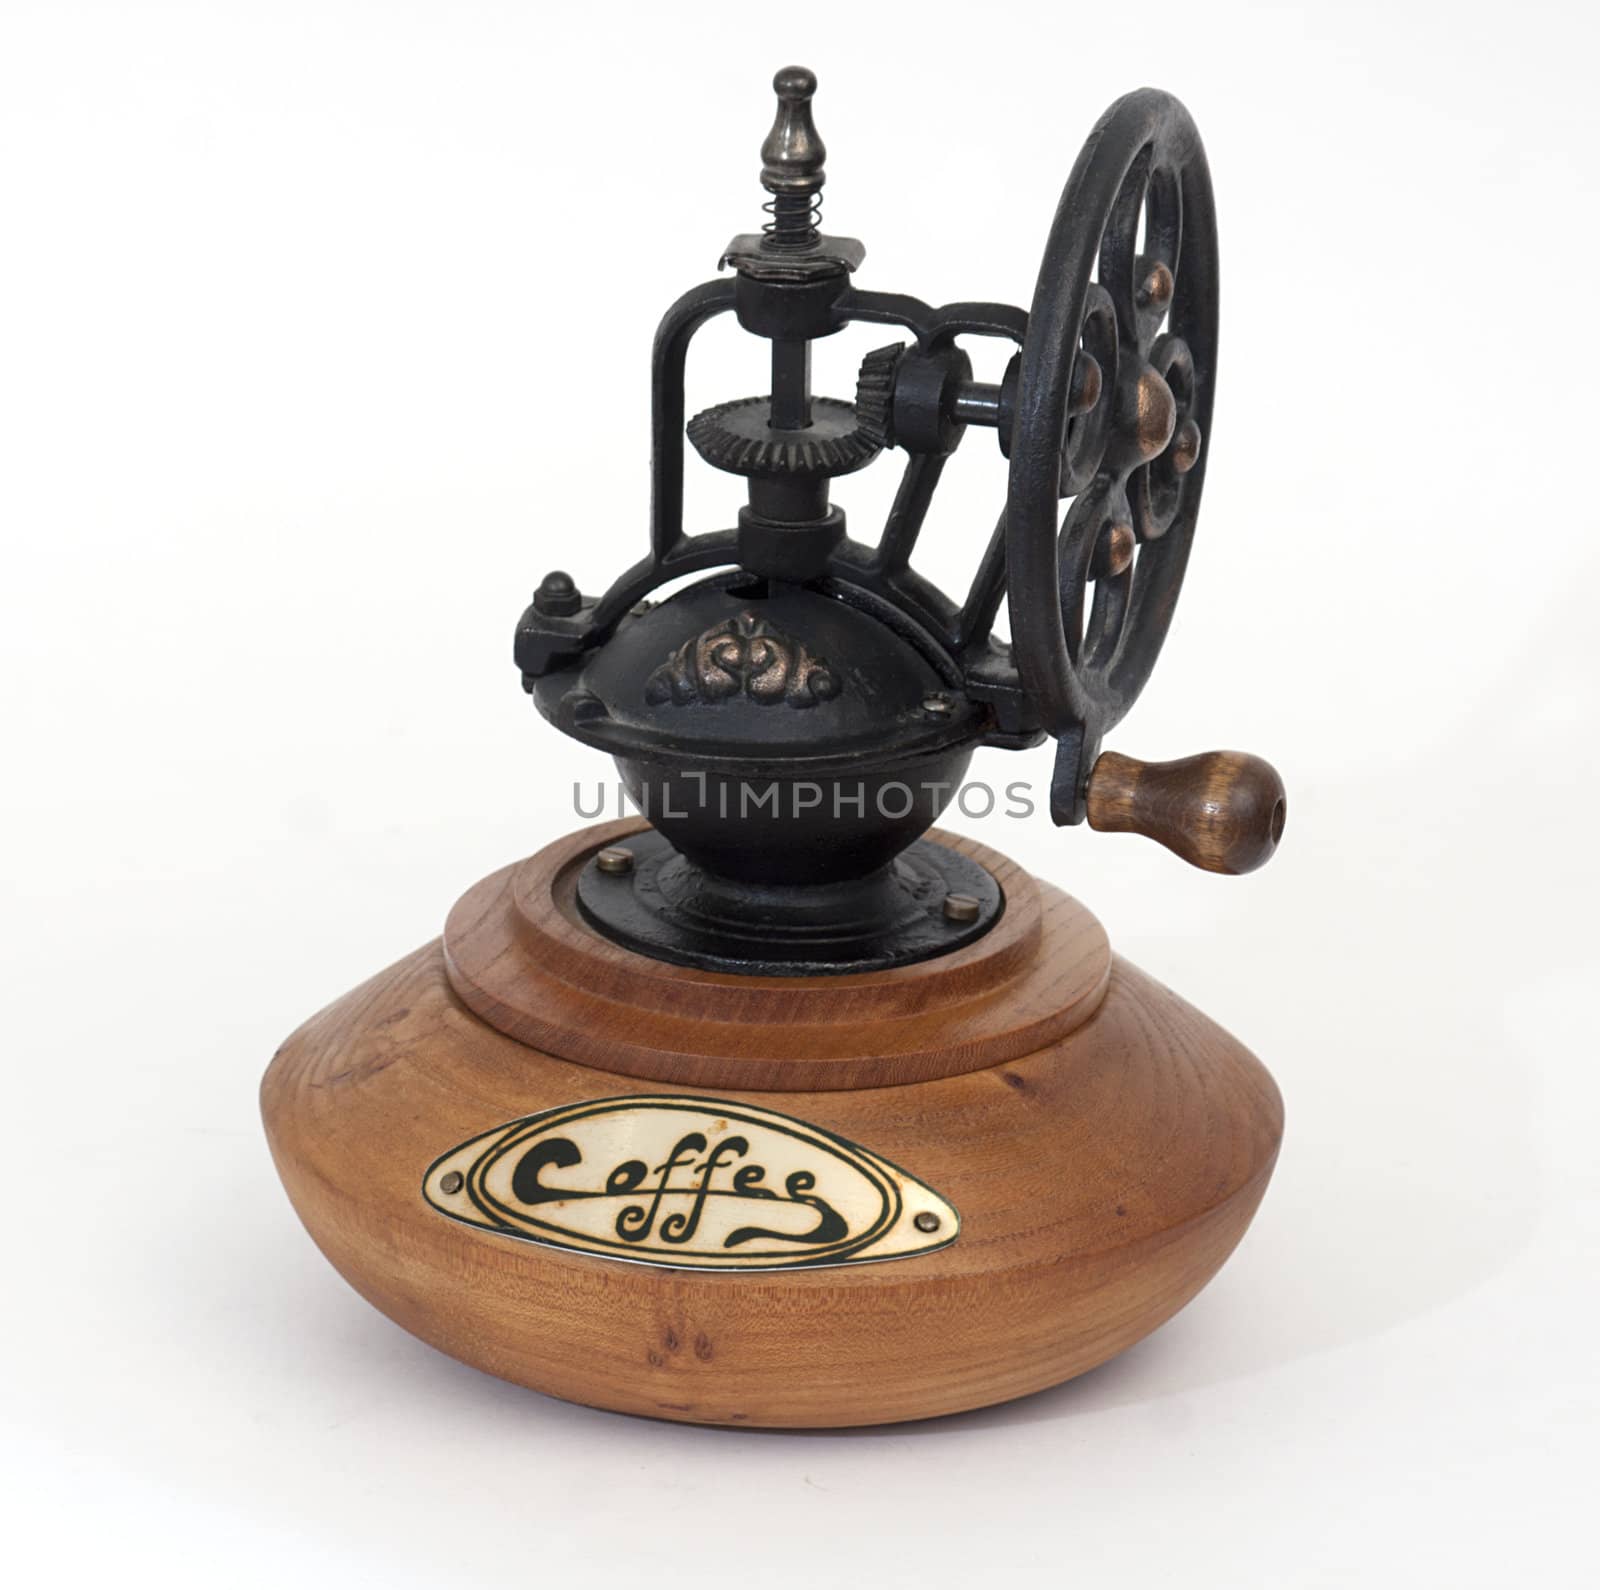 antique coffee grinder, isolated (255, 255, 255)